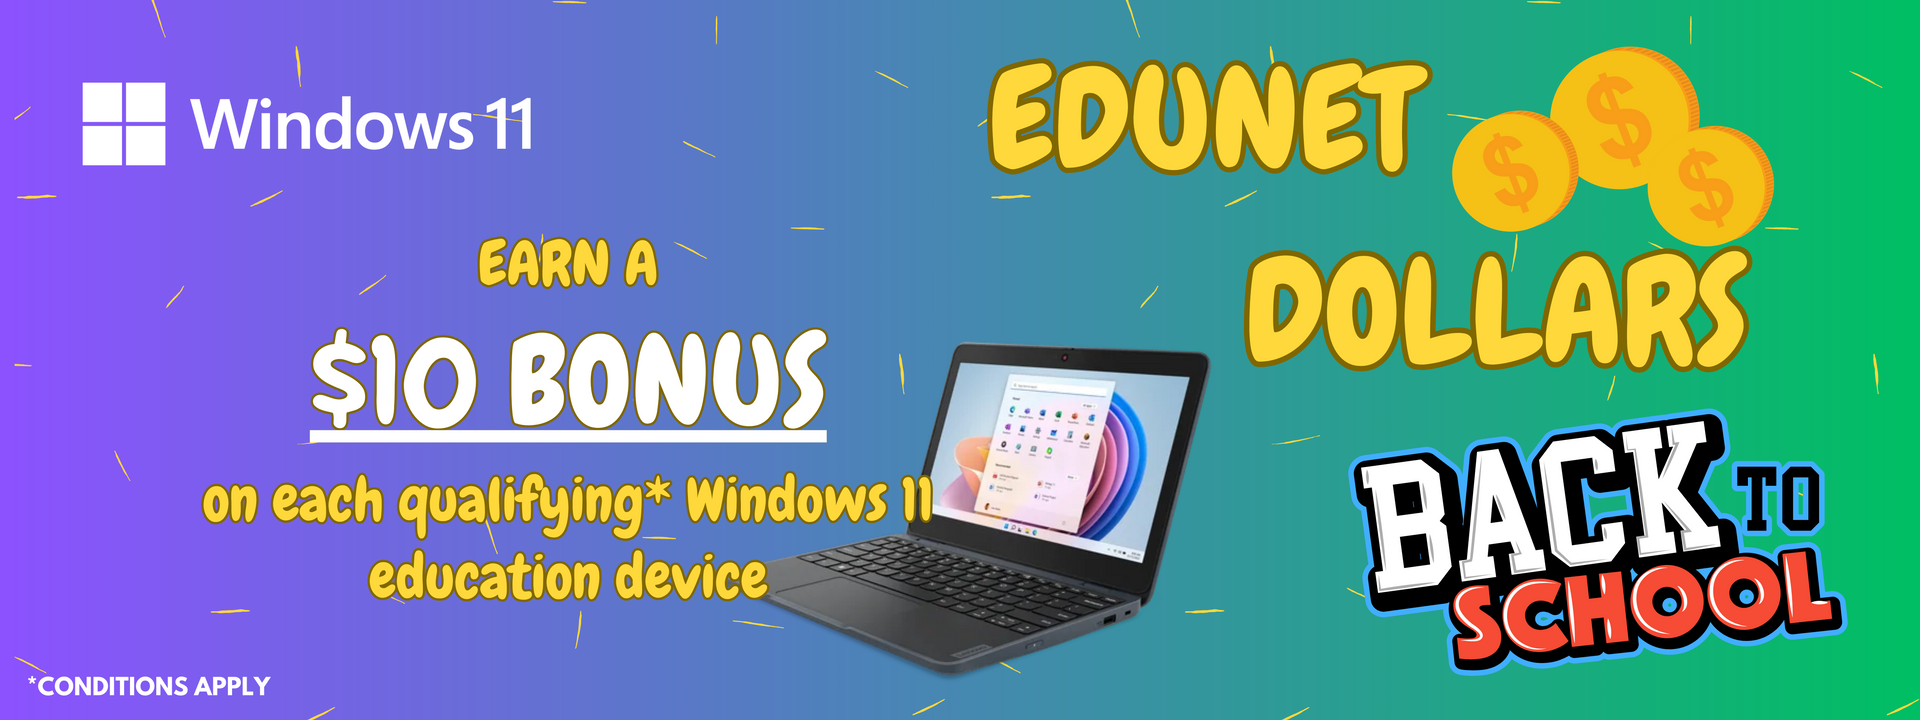 an ad for edunet dollars back to school with a laptop